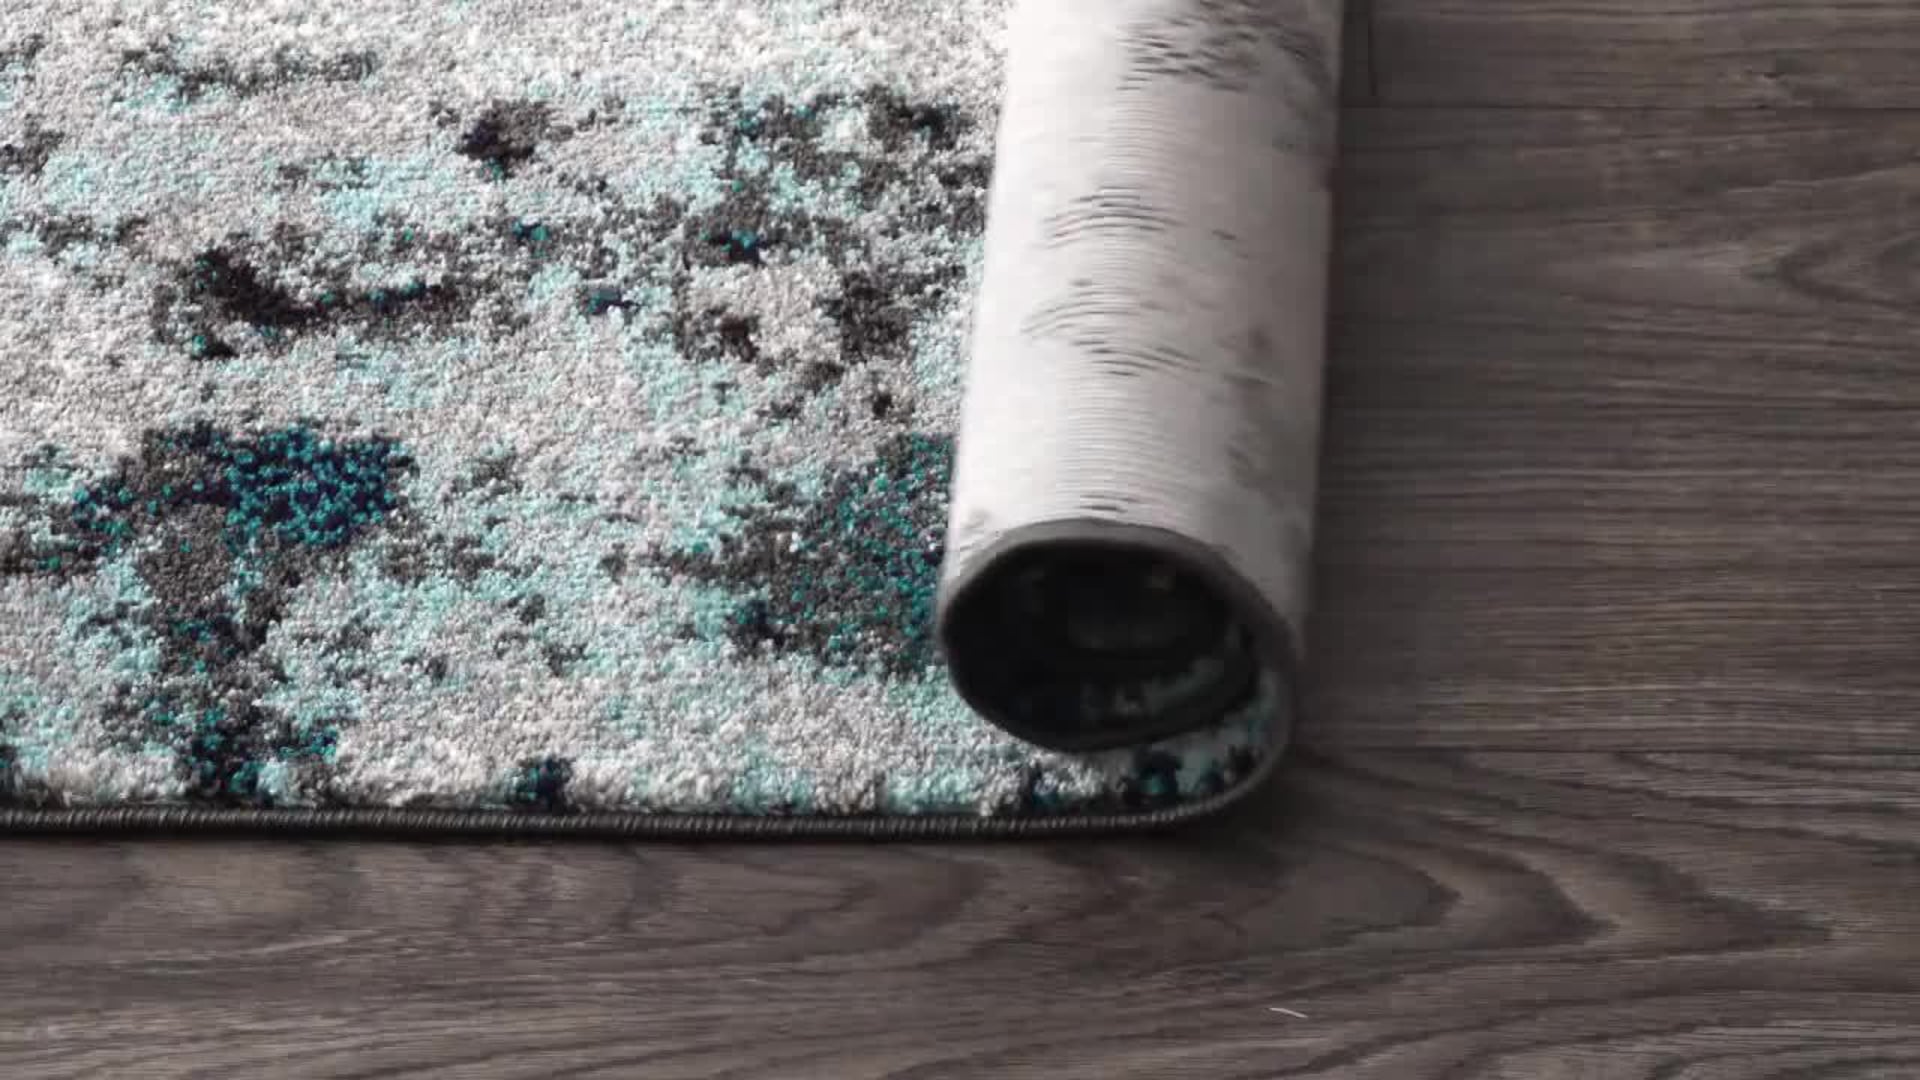 Winter Abstract Area Rug, Blue, 8'x10'